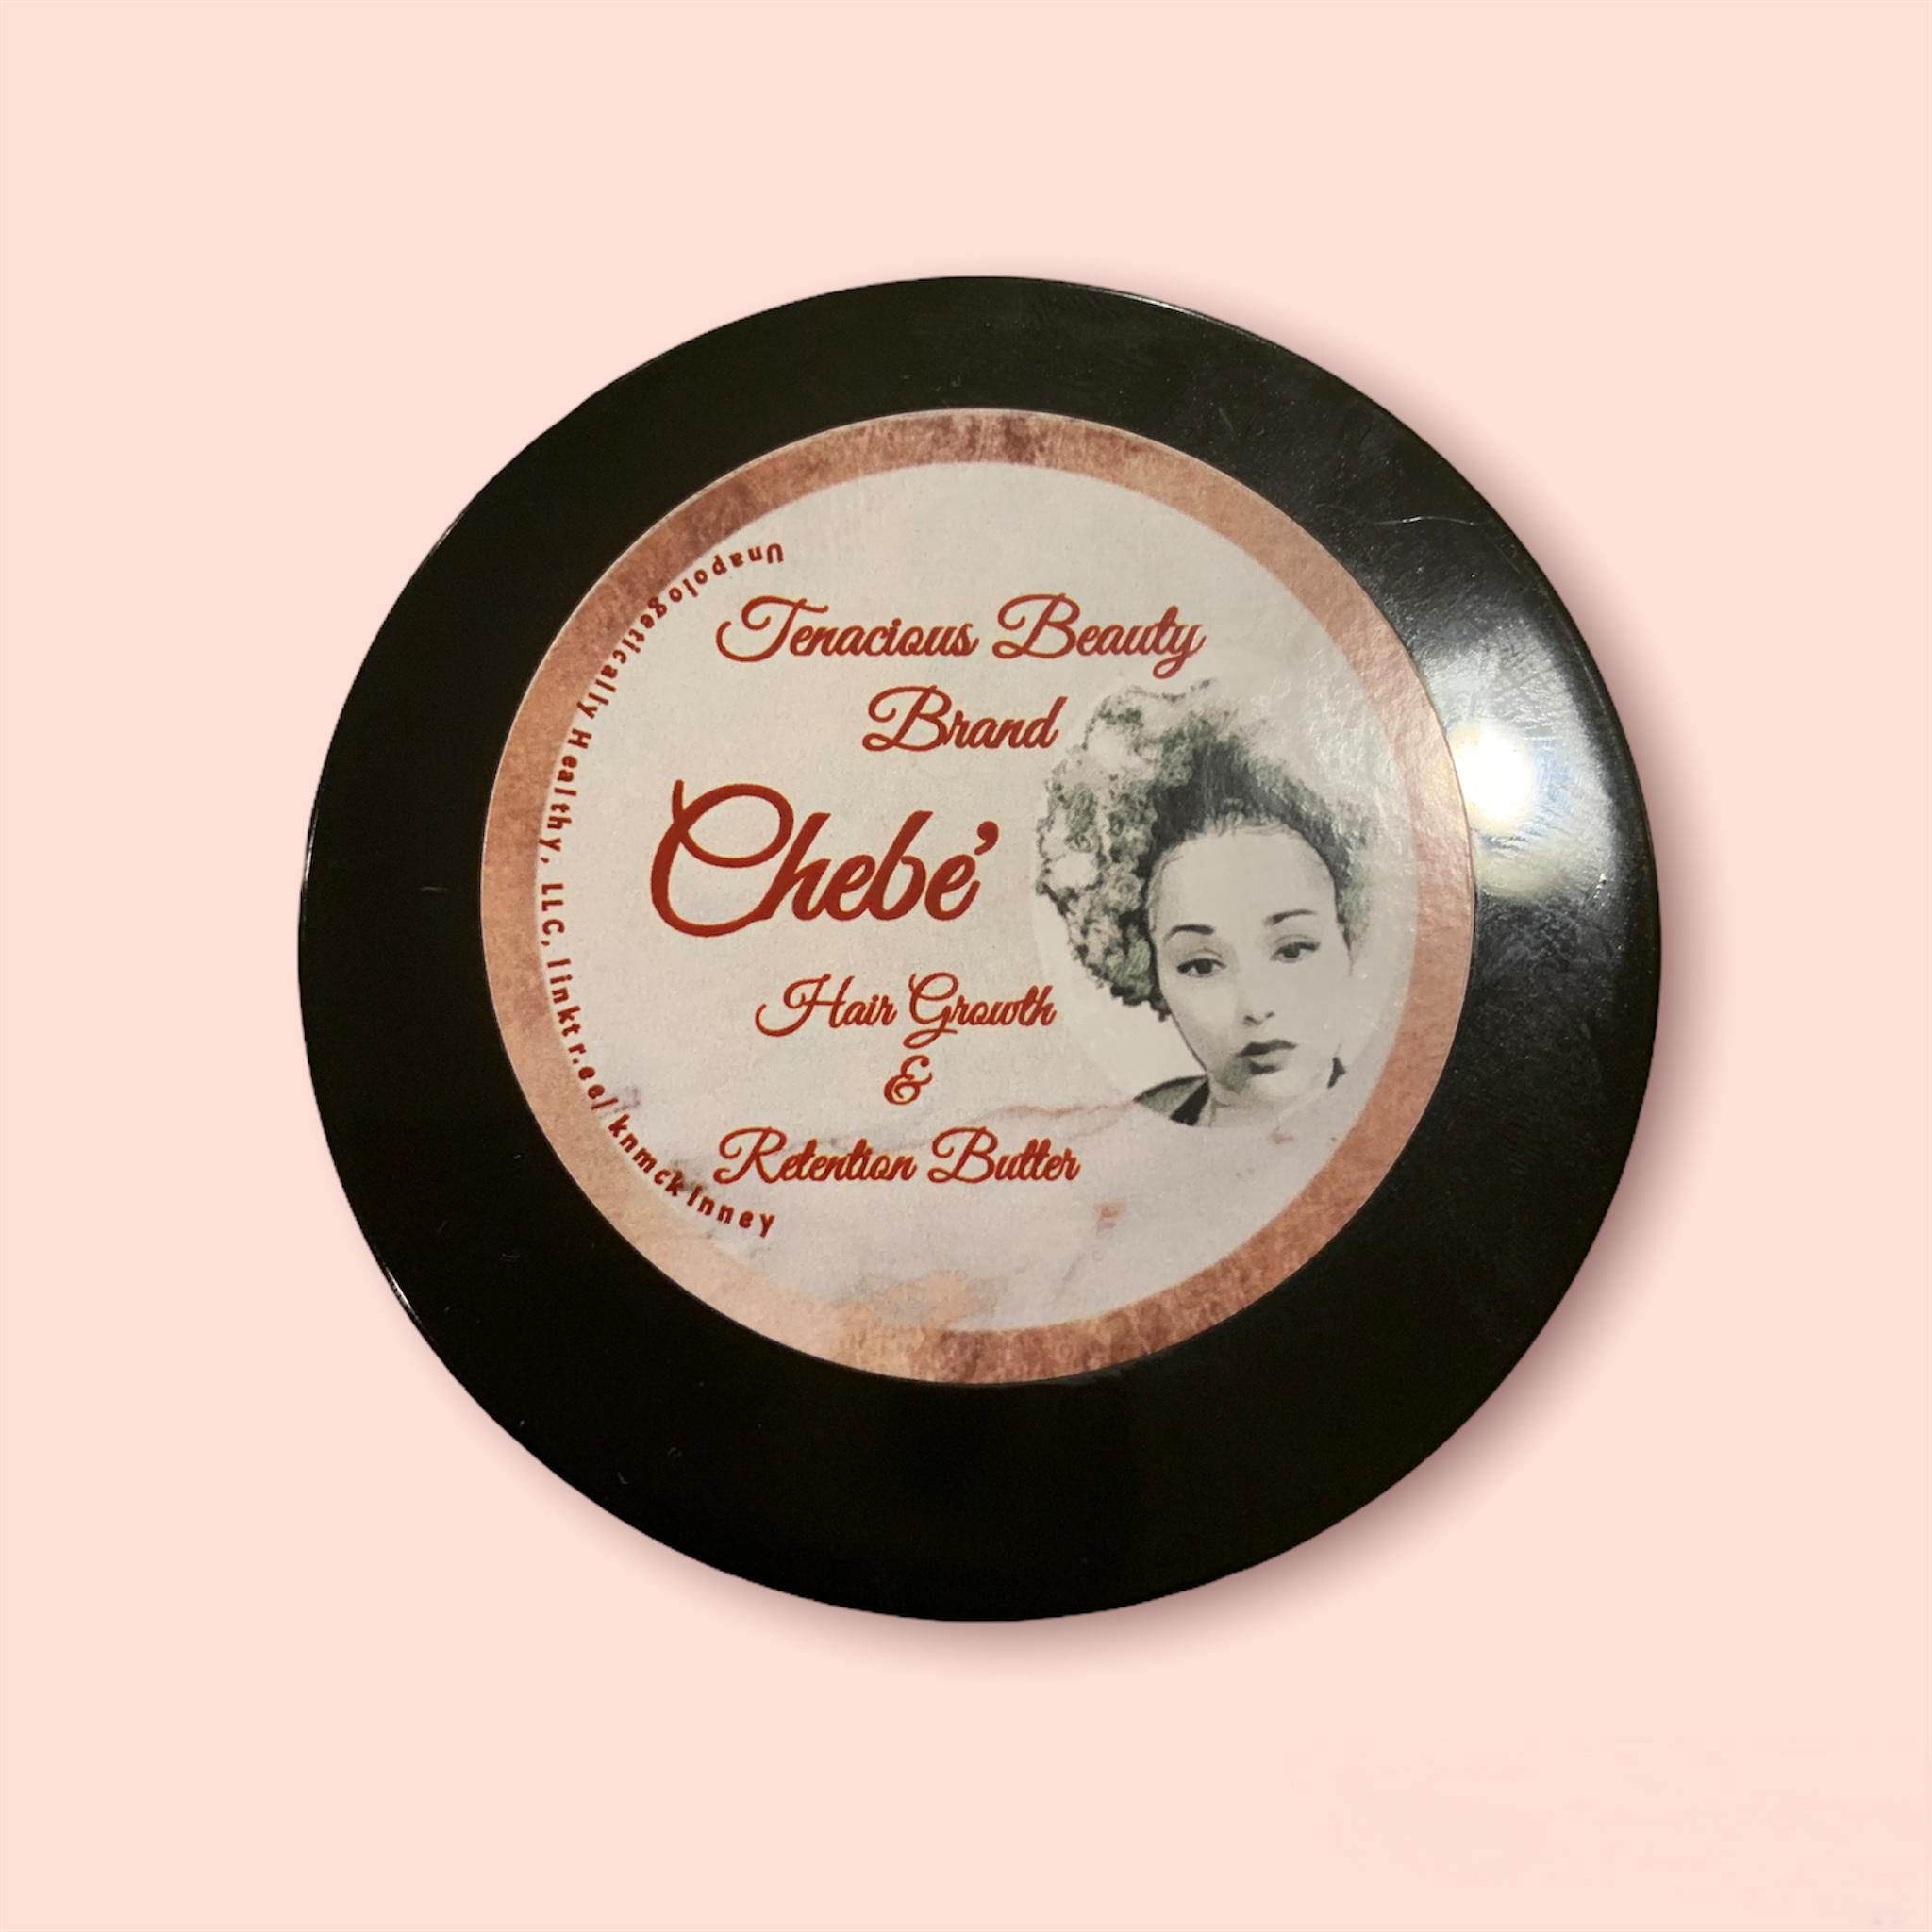 Chebe Hair Growth & Retention Butter